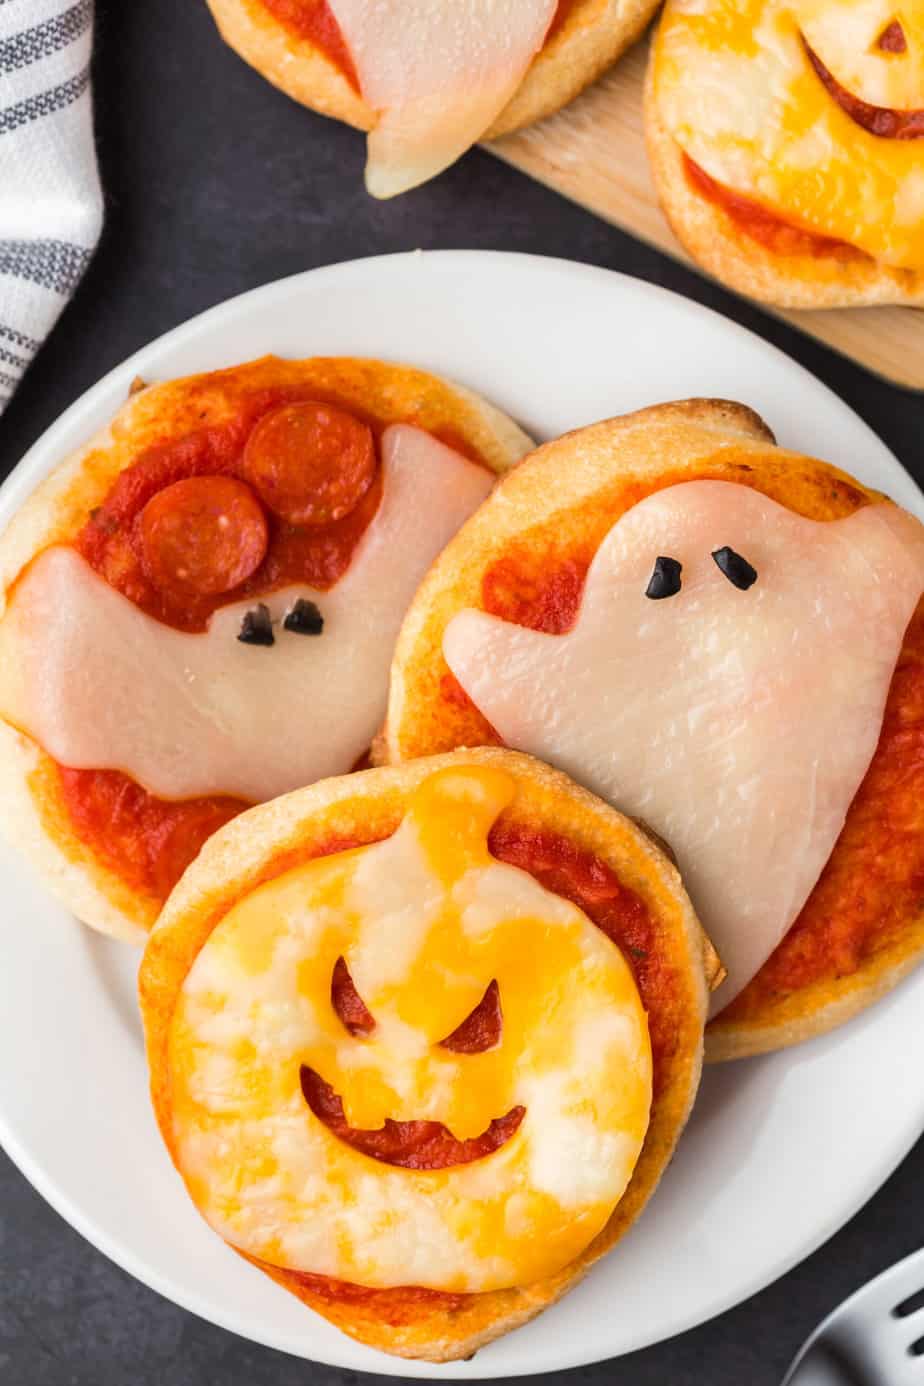 Mini pizzas on a plate from overhead with cheese decorated like a bat, ghost and jack-o-lantern.